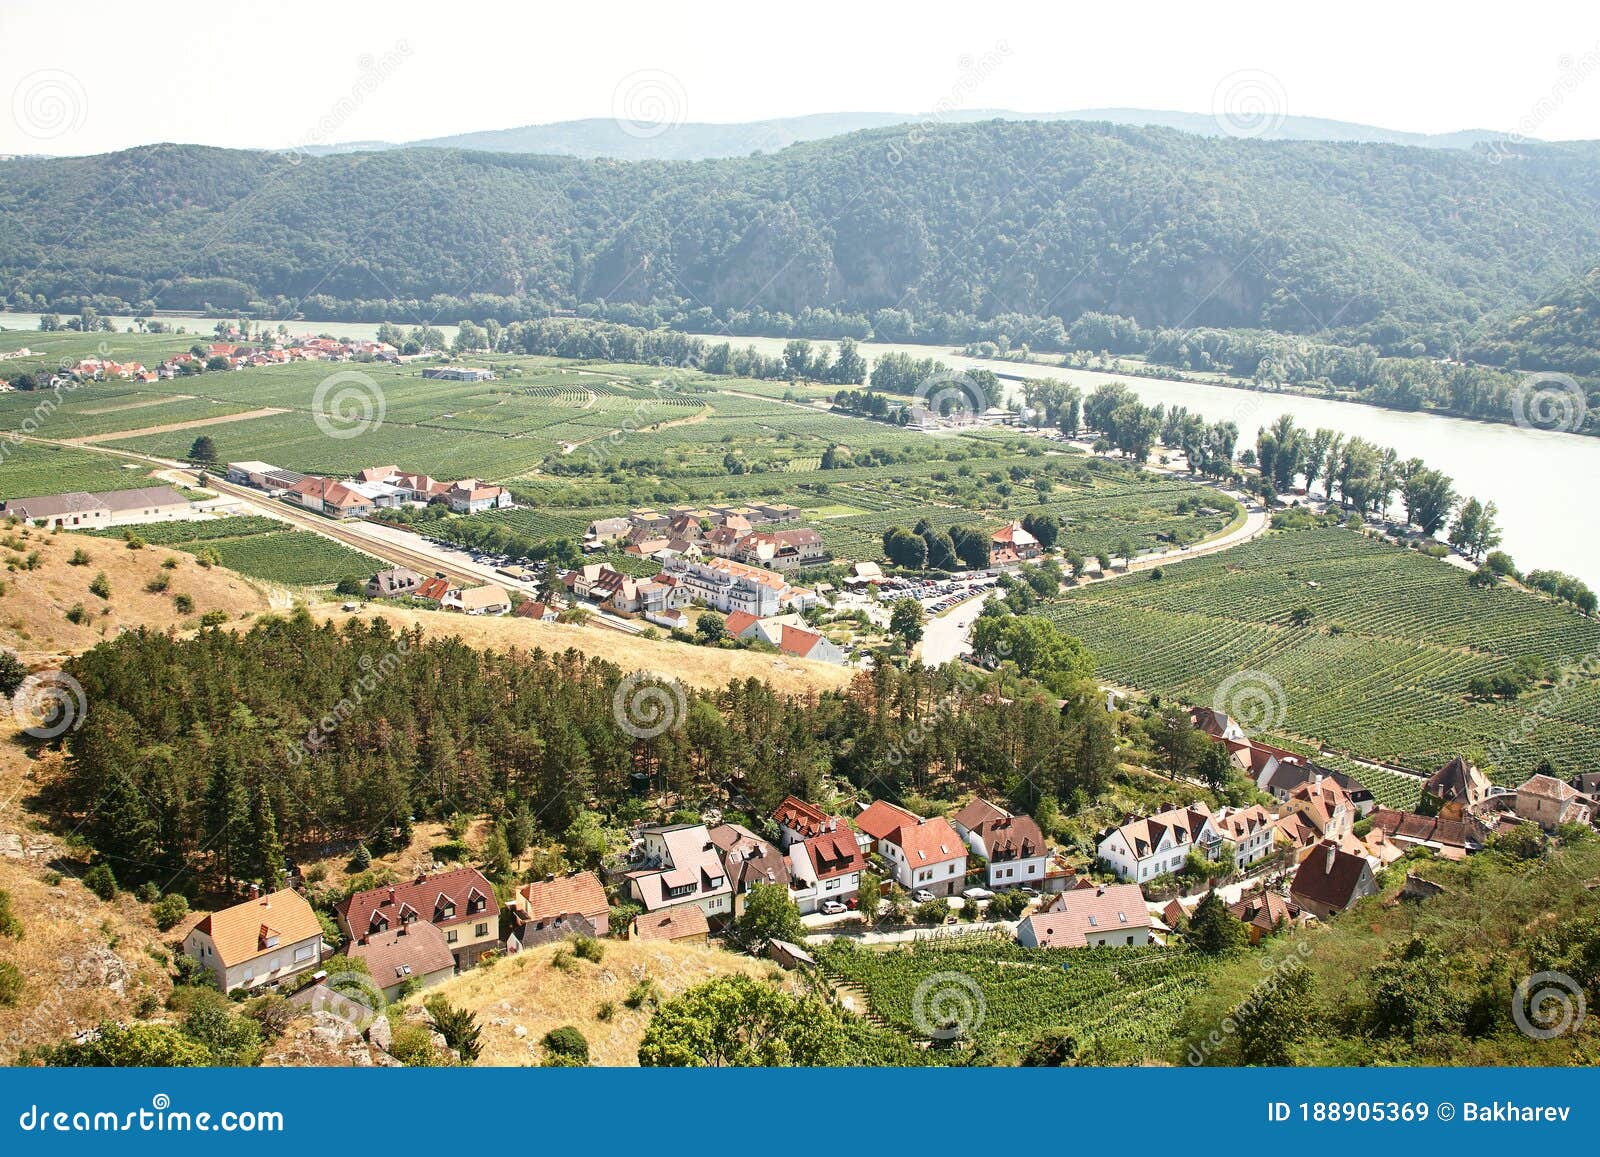 Picturesque European Town Far Away. Scenic Mountain Landscape with